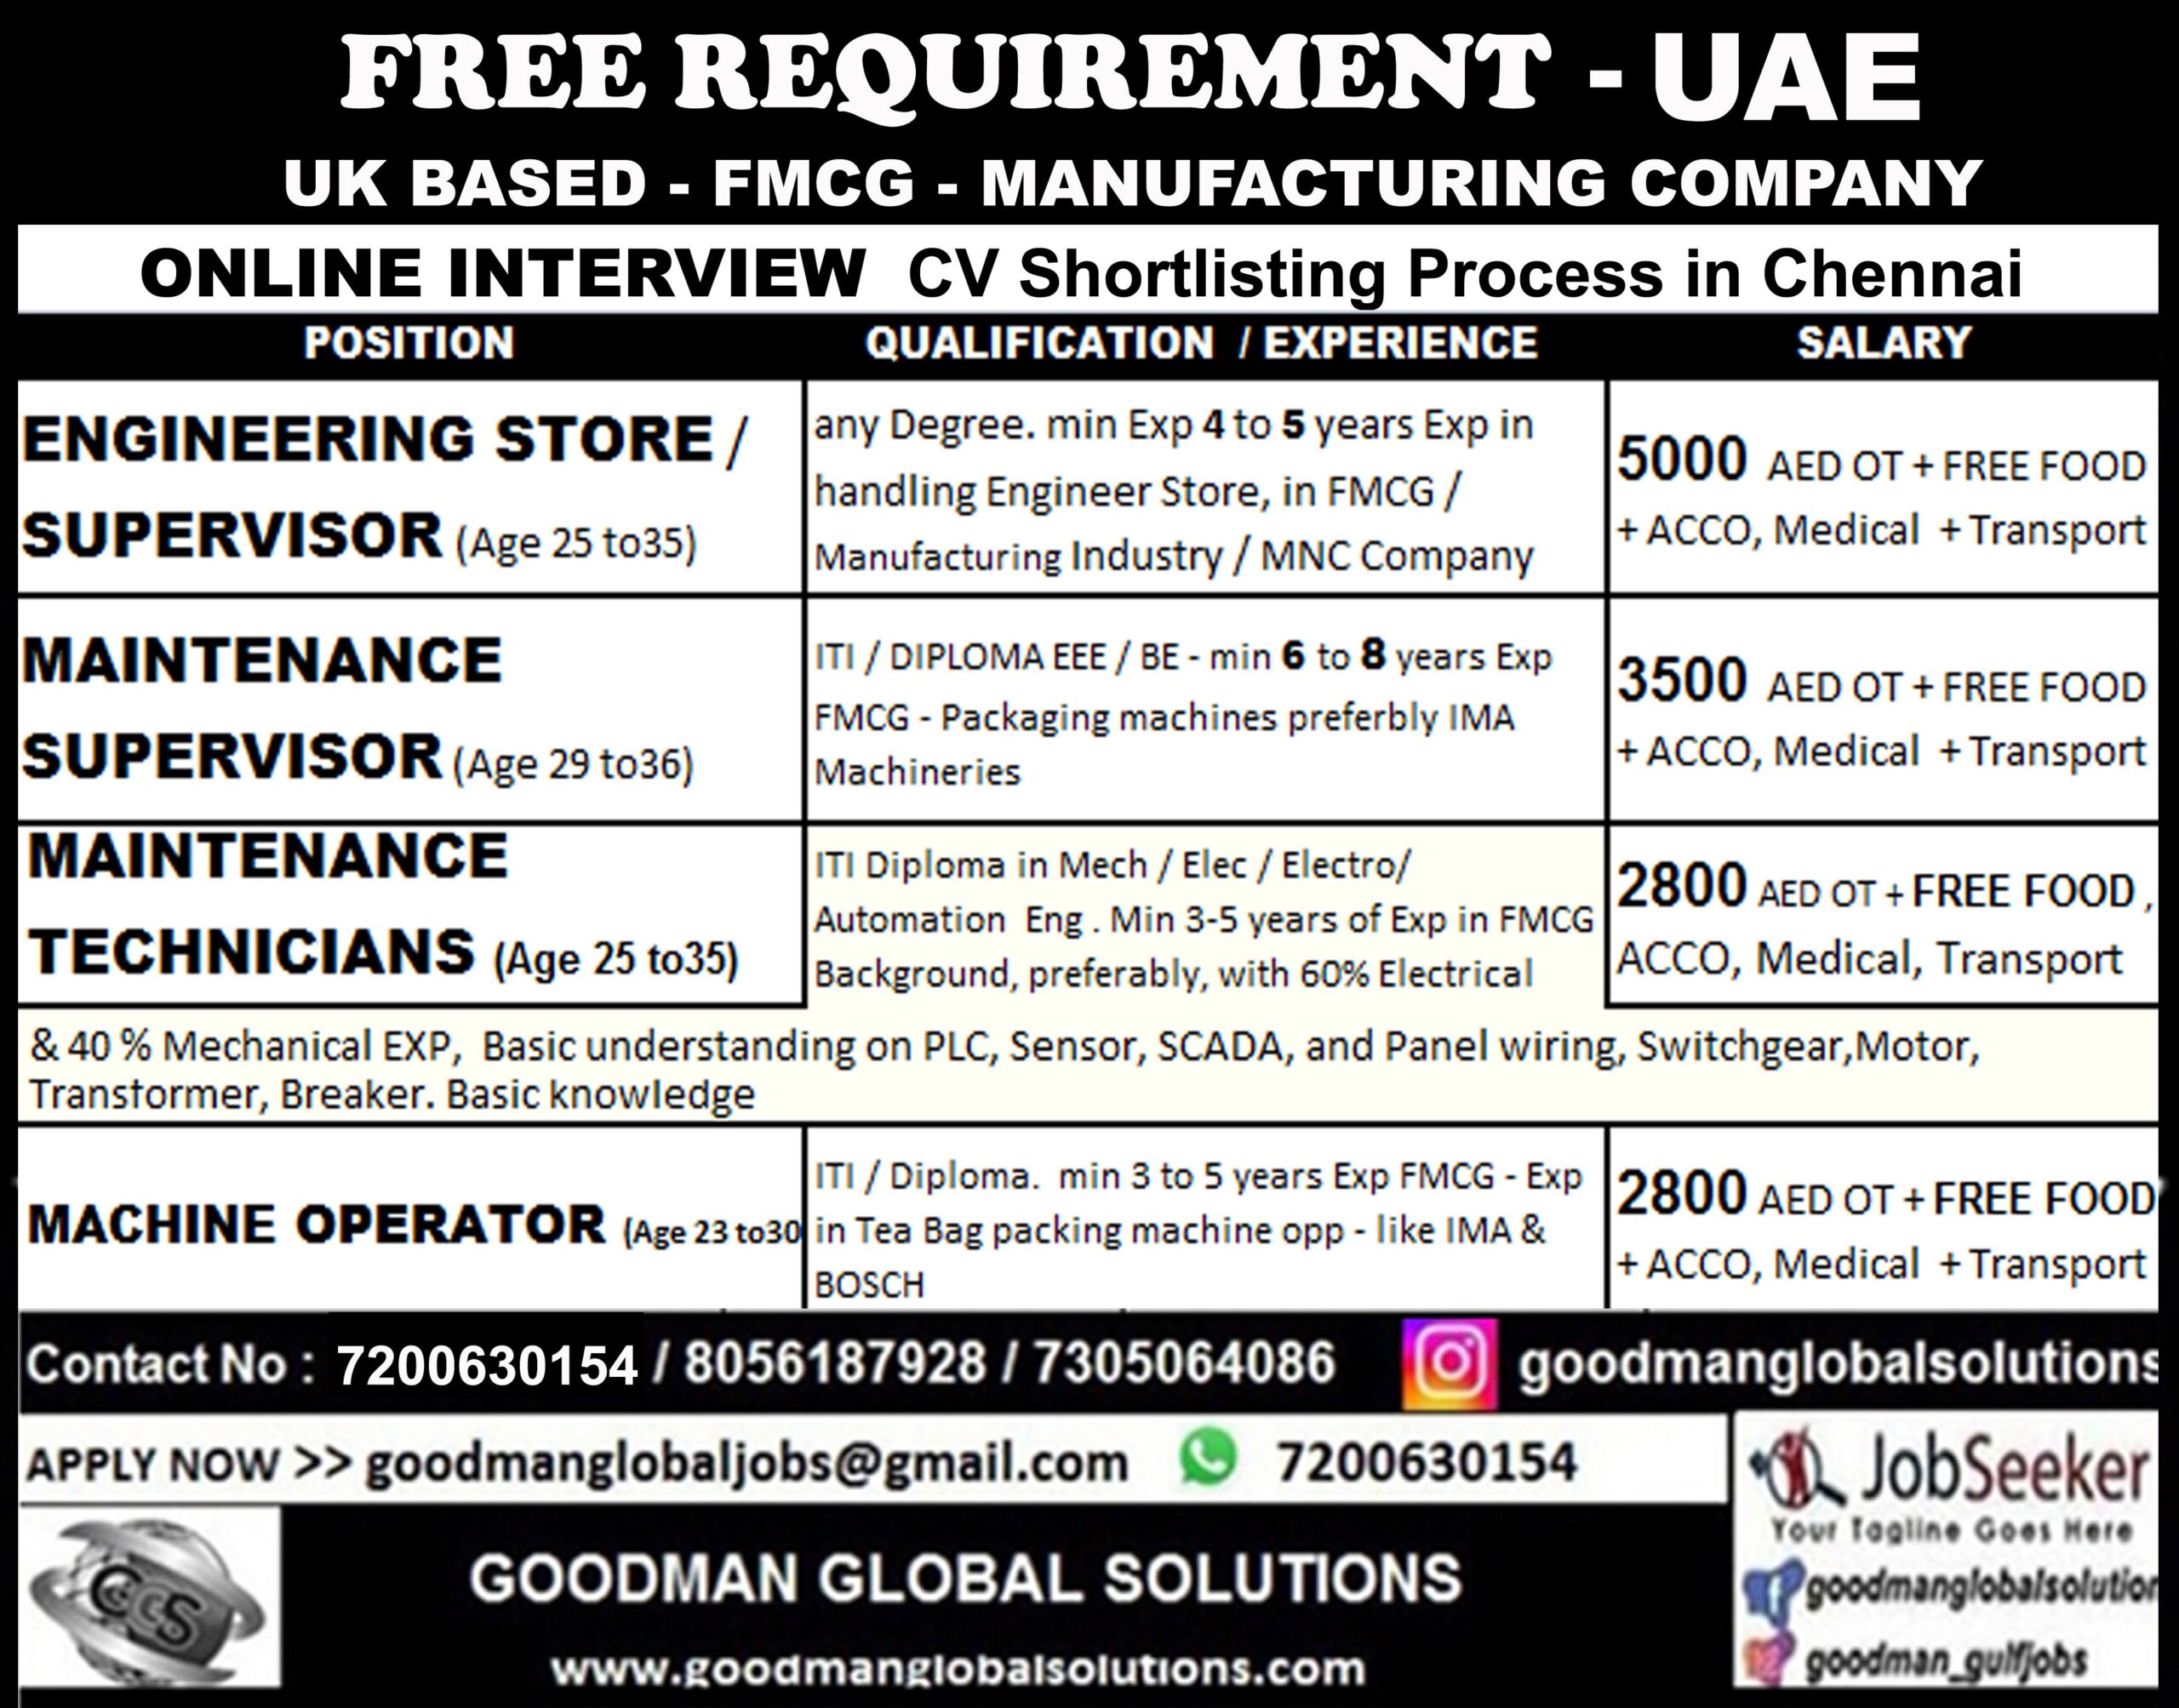 UAE FREE REQUIREMENT copy 1 scaled